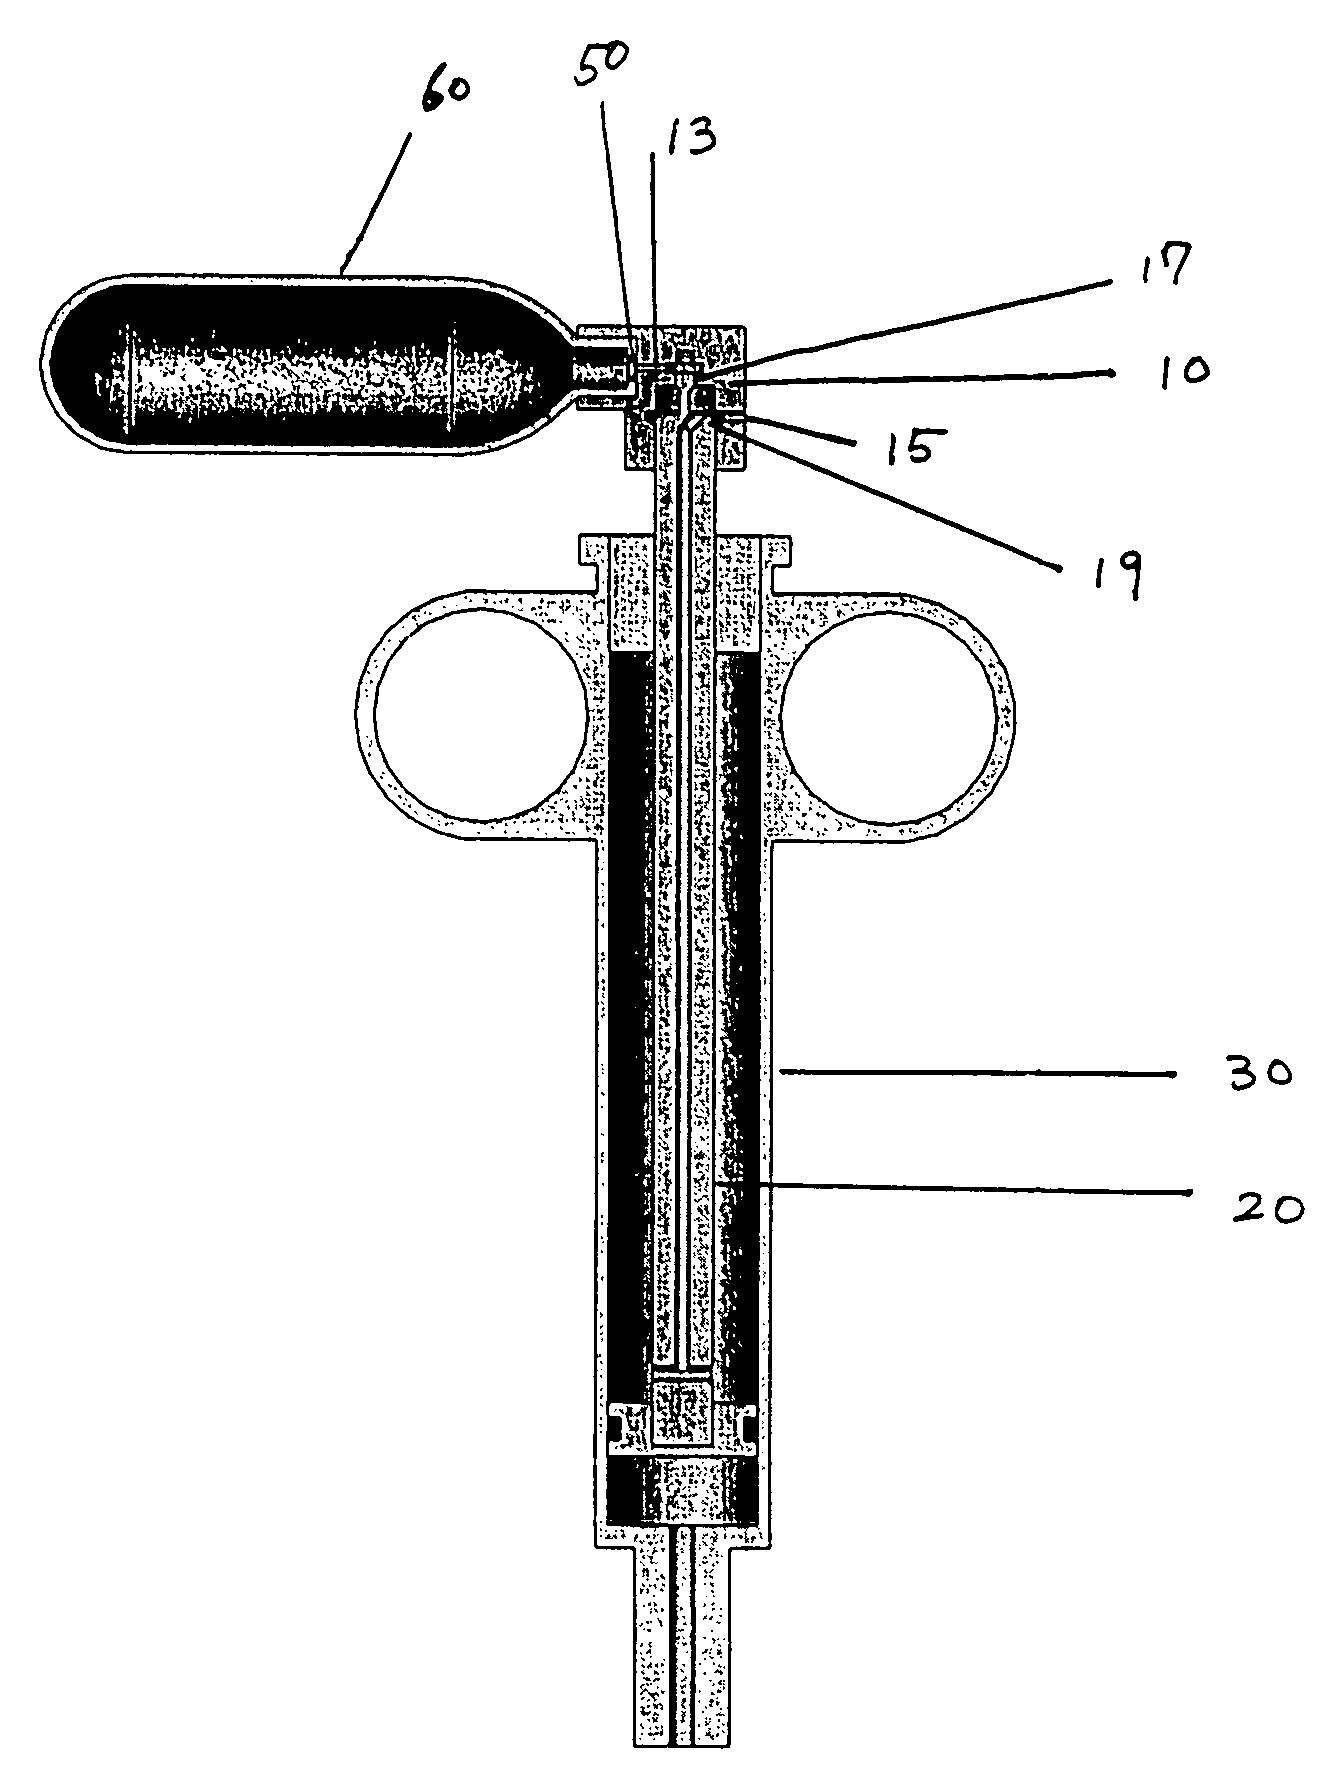 Self-contained power-assisted syringe